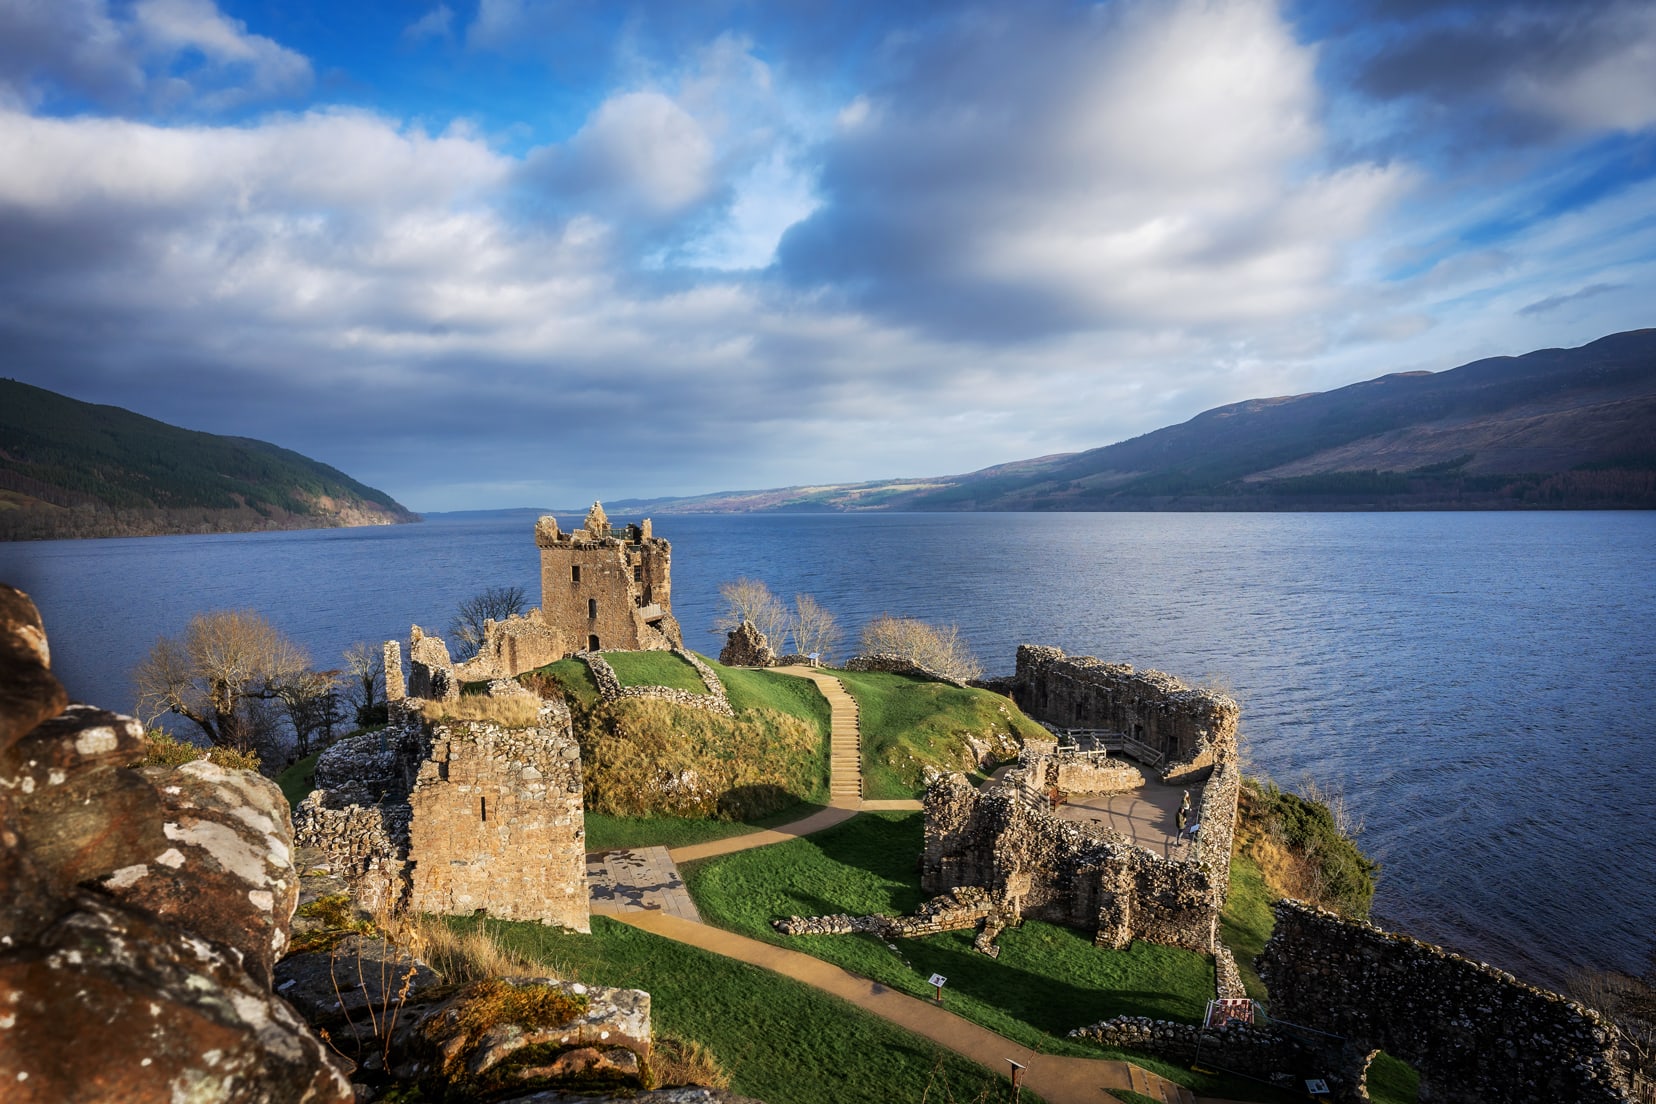 Urquhart Castle ruins with Loch ness in the background